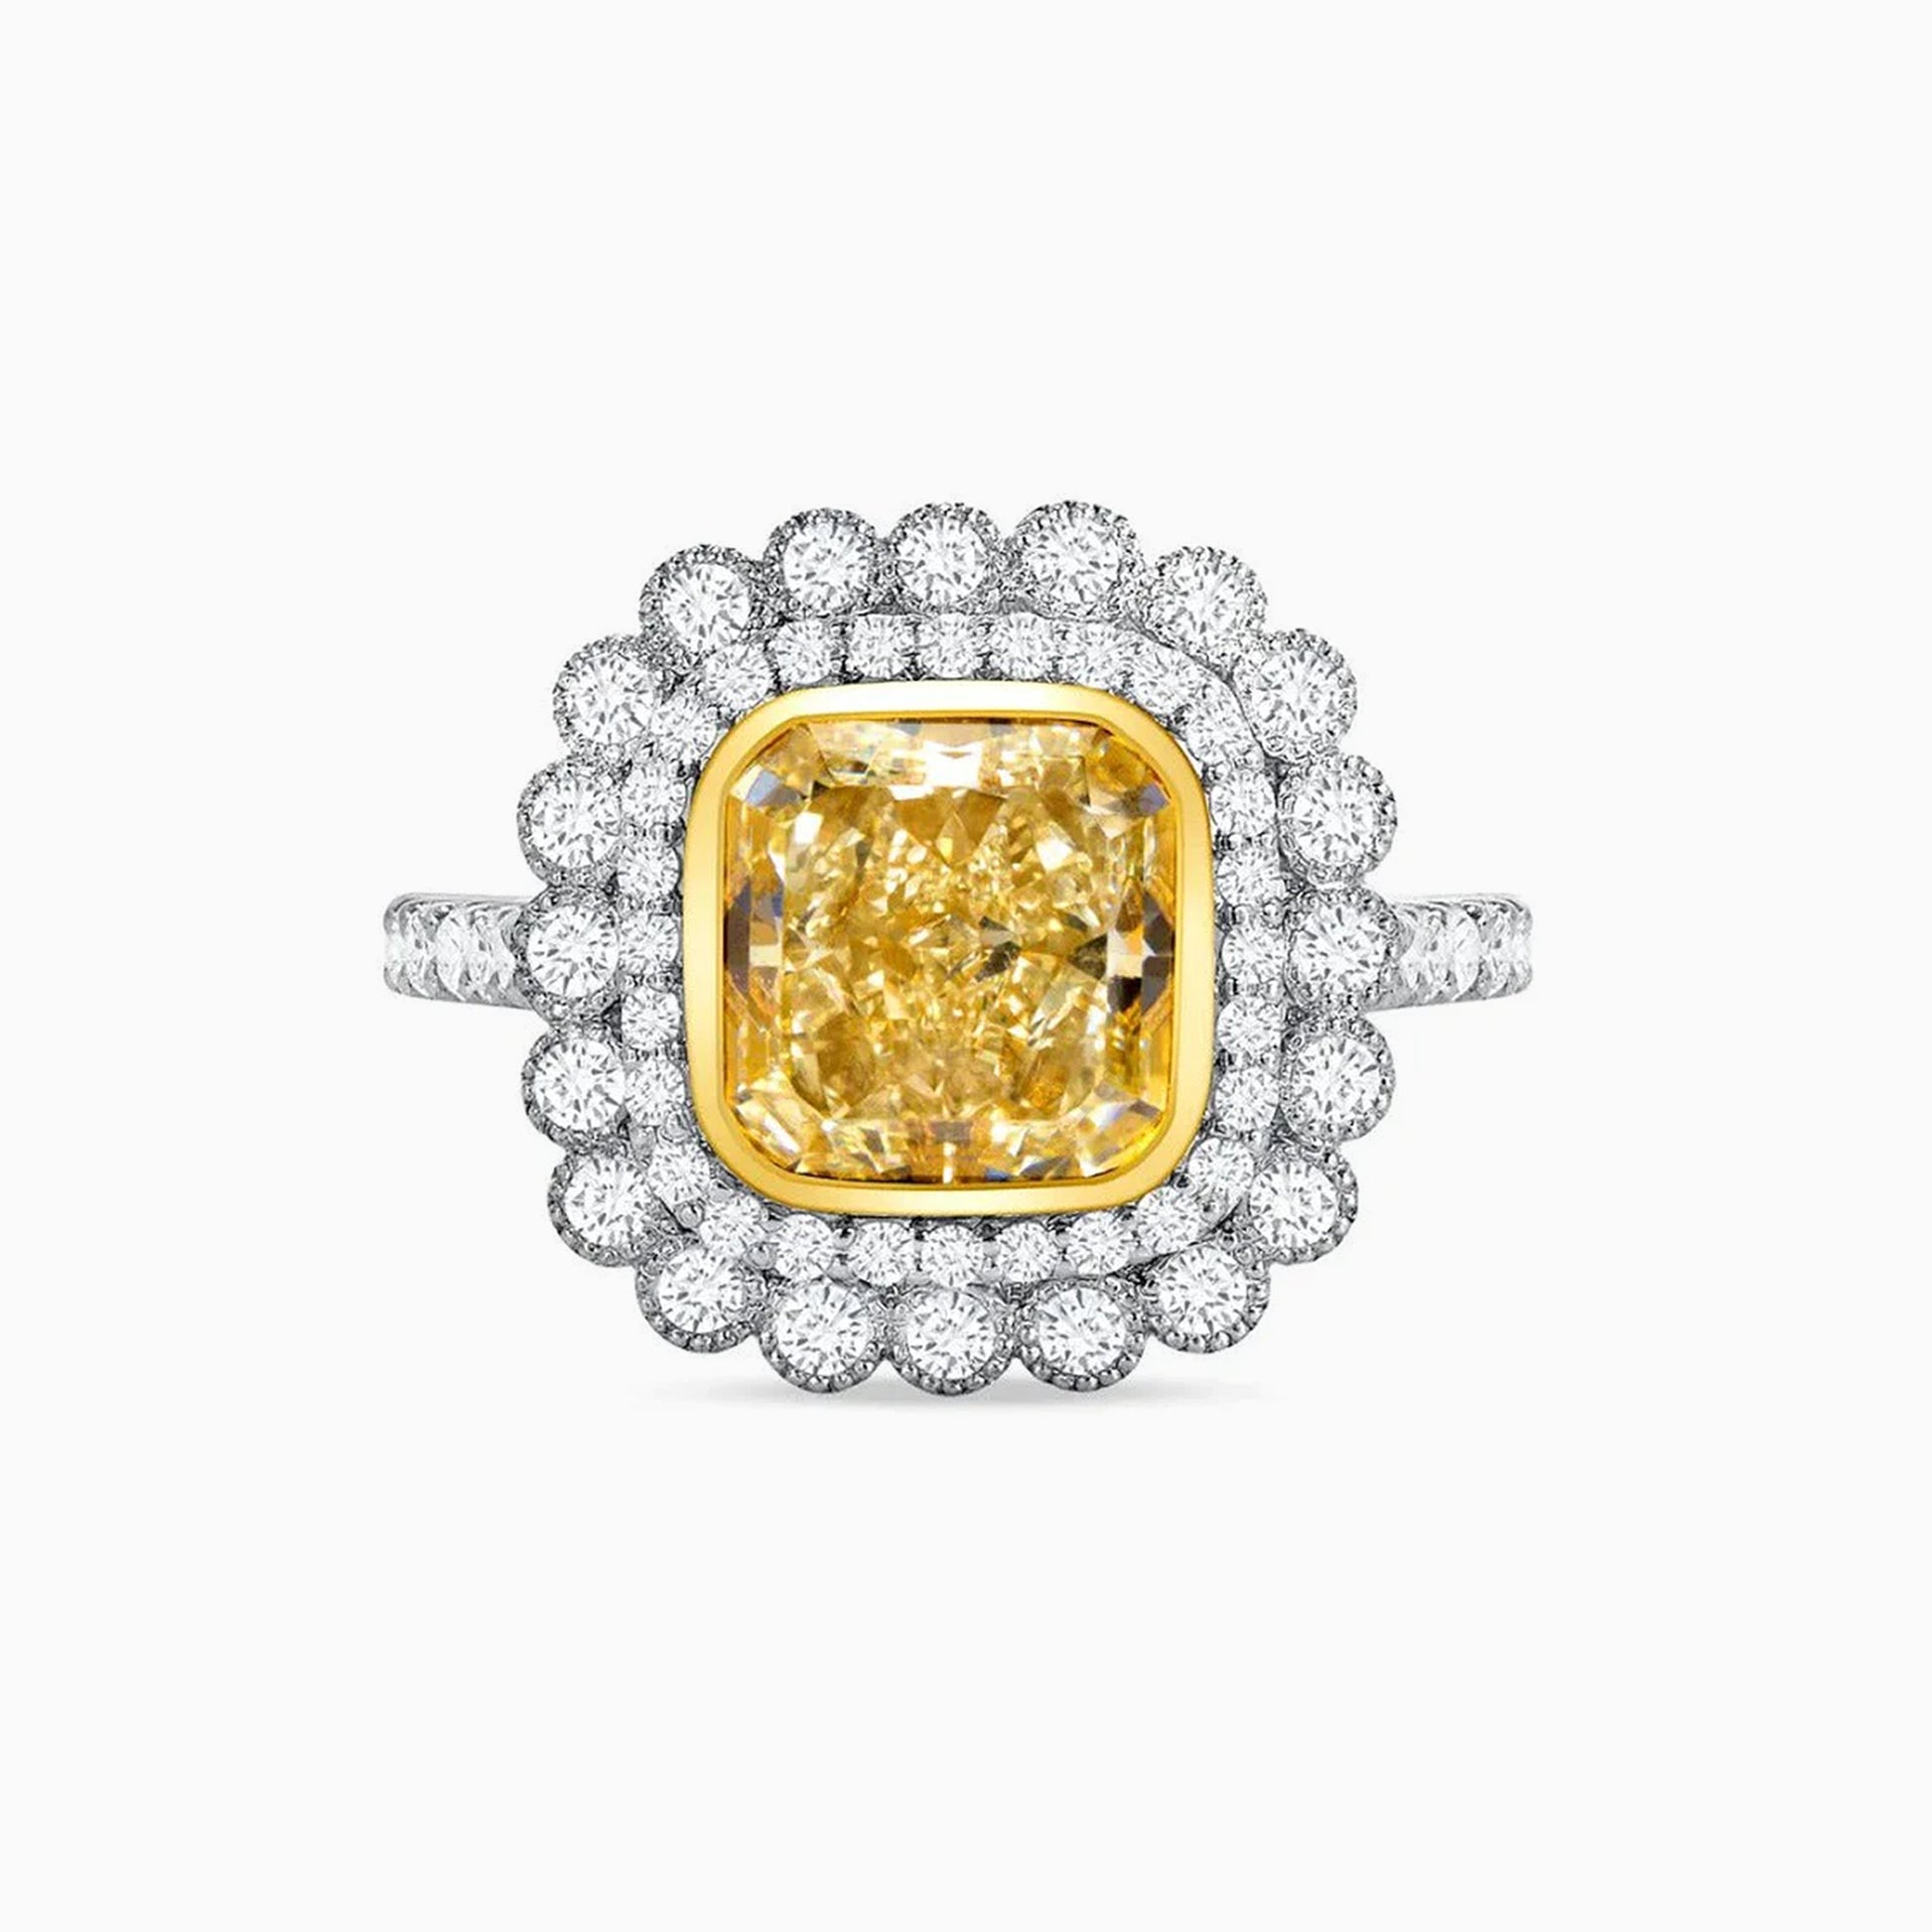 Fancy Yellow Diamond Platinum Ring on a white background